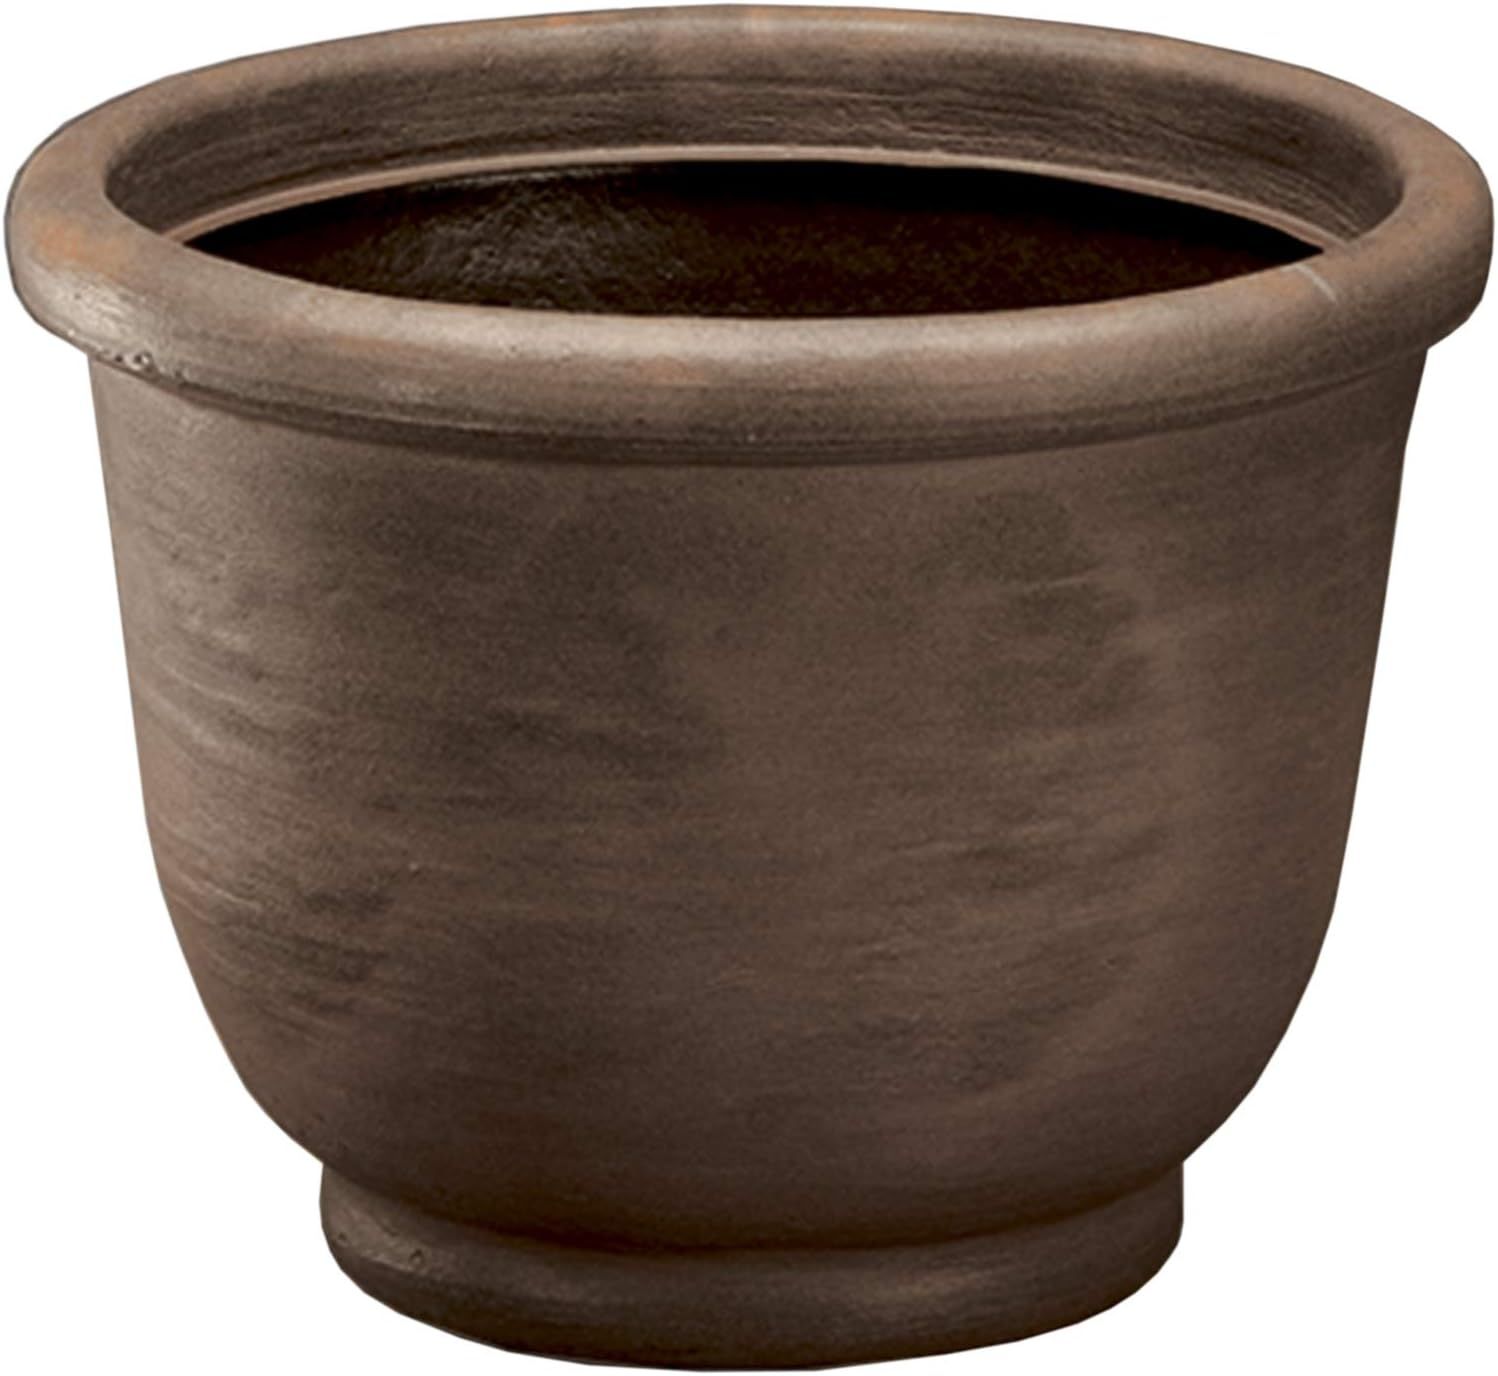 Crescent Garden Agave Planter, Charming Old-World Plant Pot, 14-Inch (Rust) | Amazon (US)